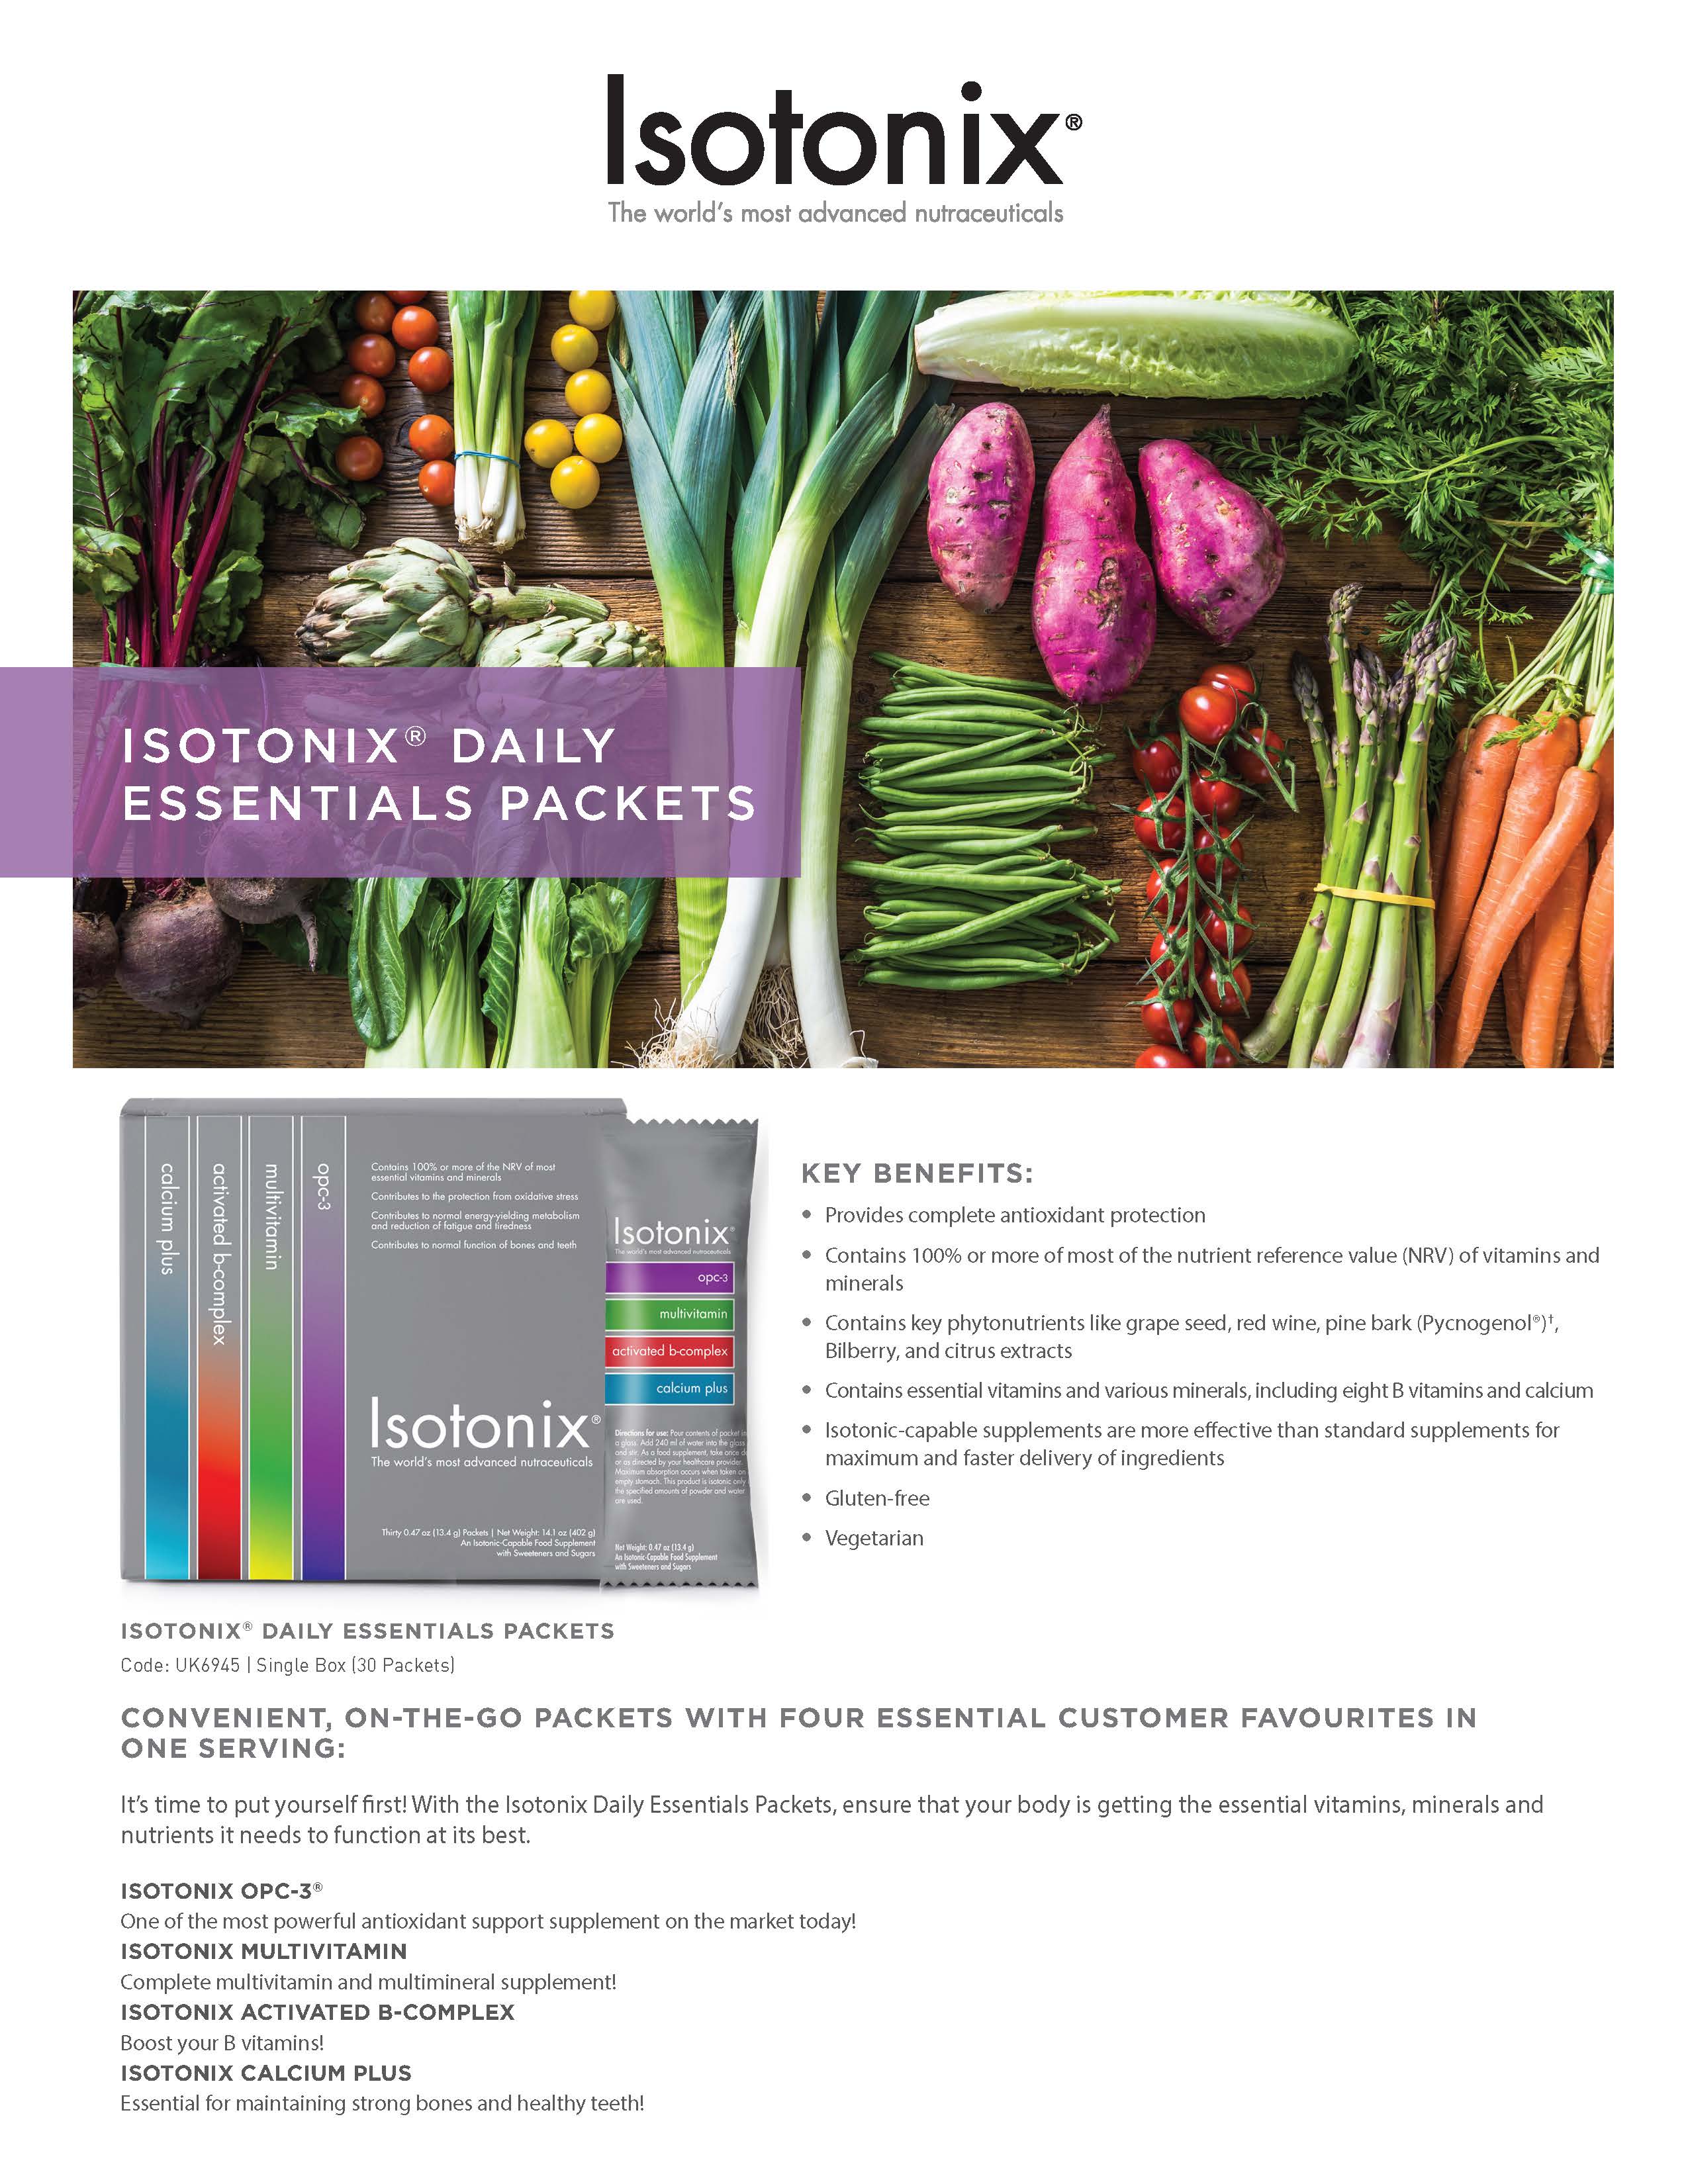 What Makes Isotonix Daily Essentials Packets Unique?